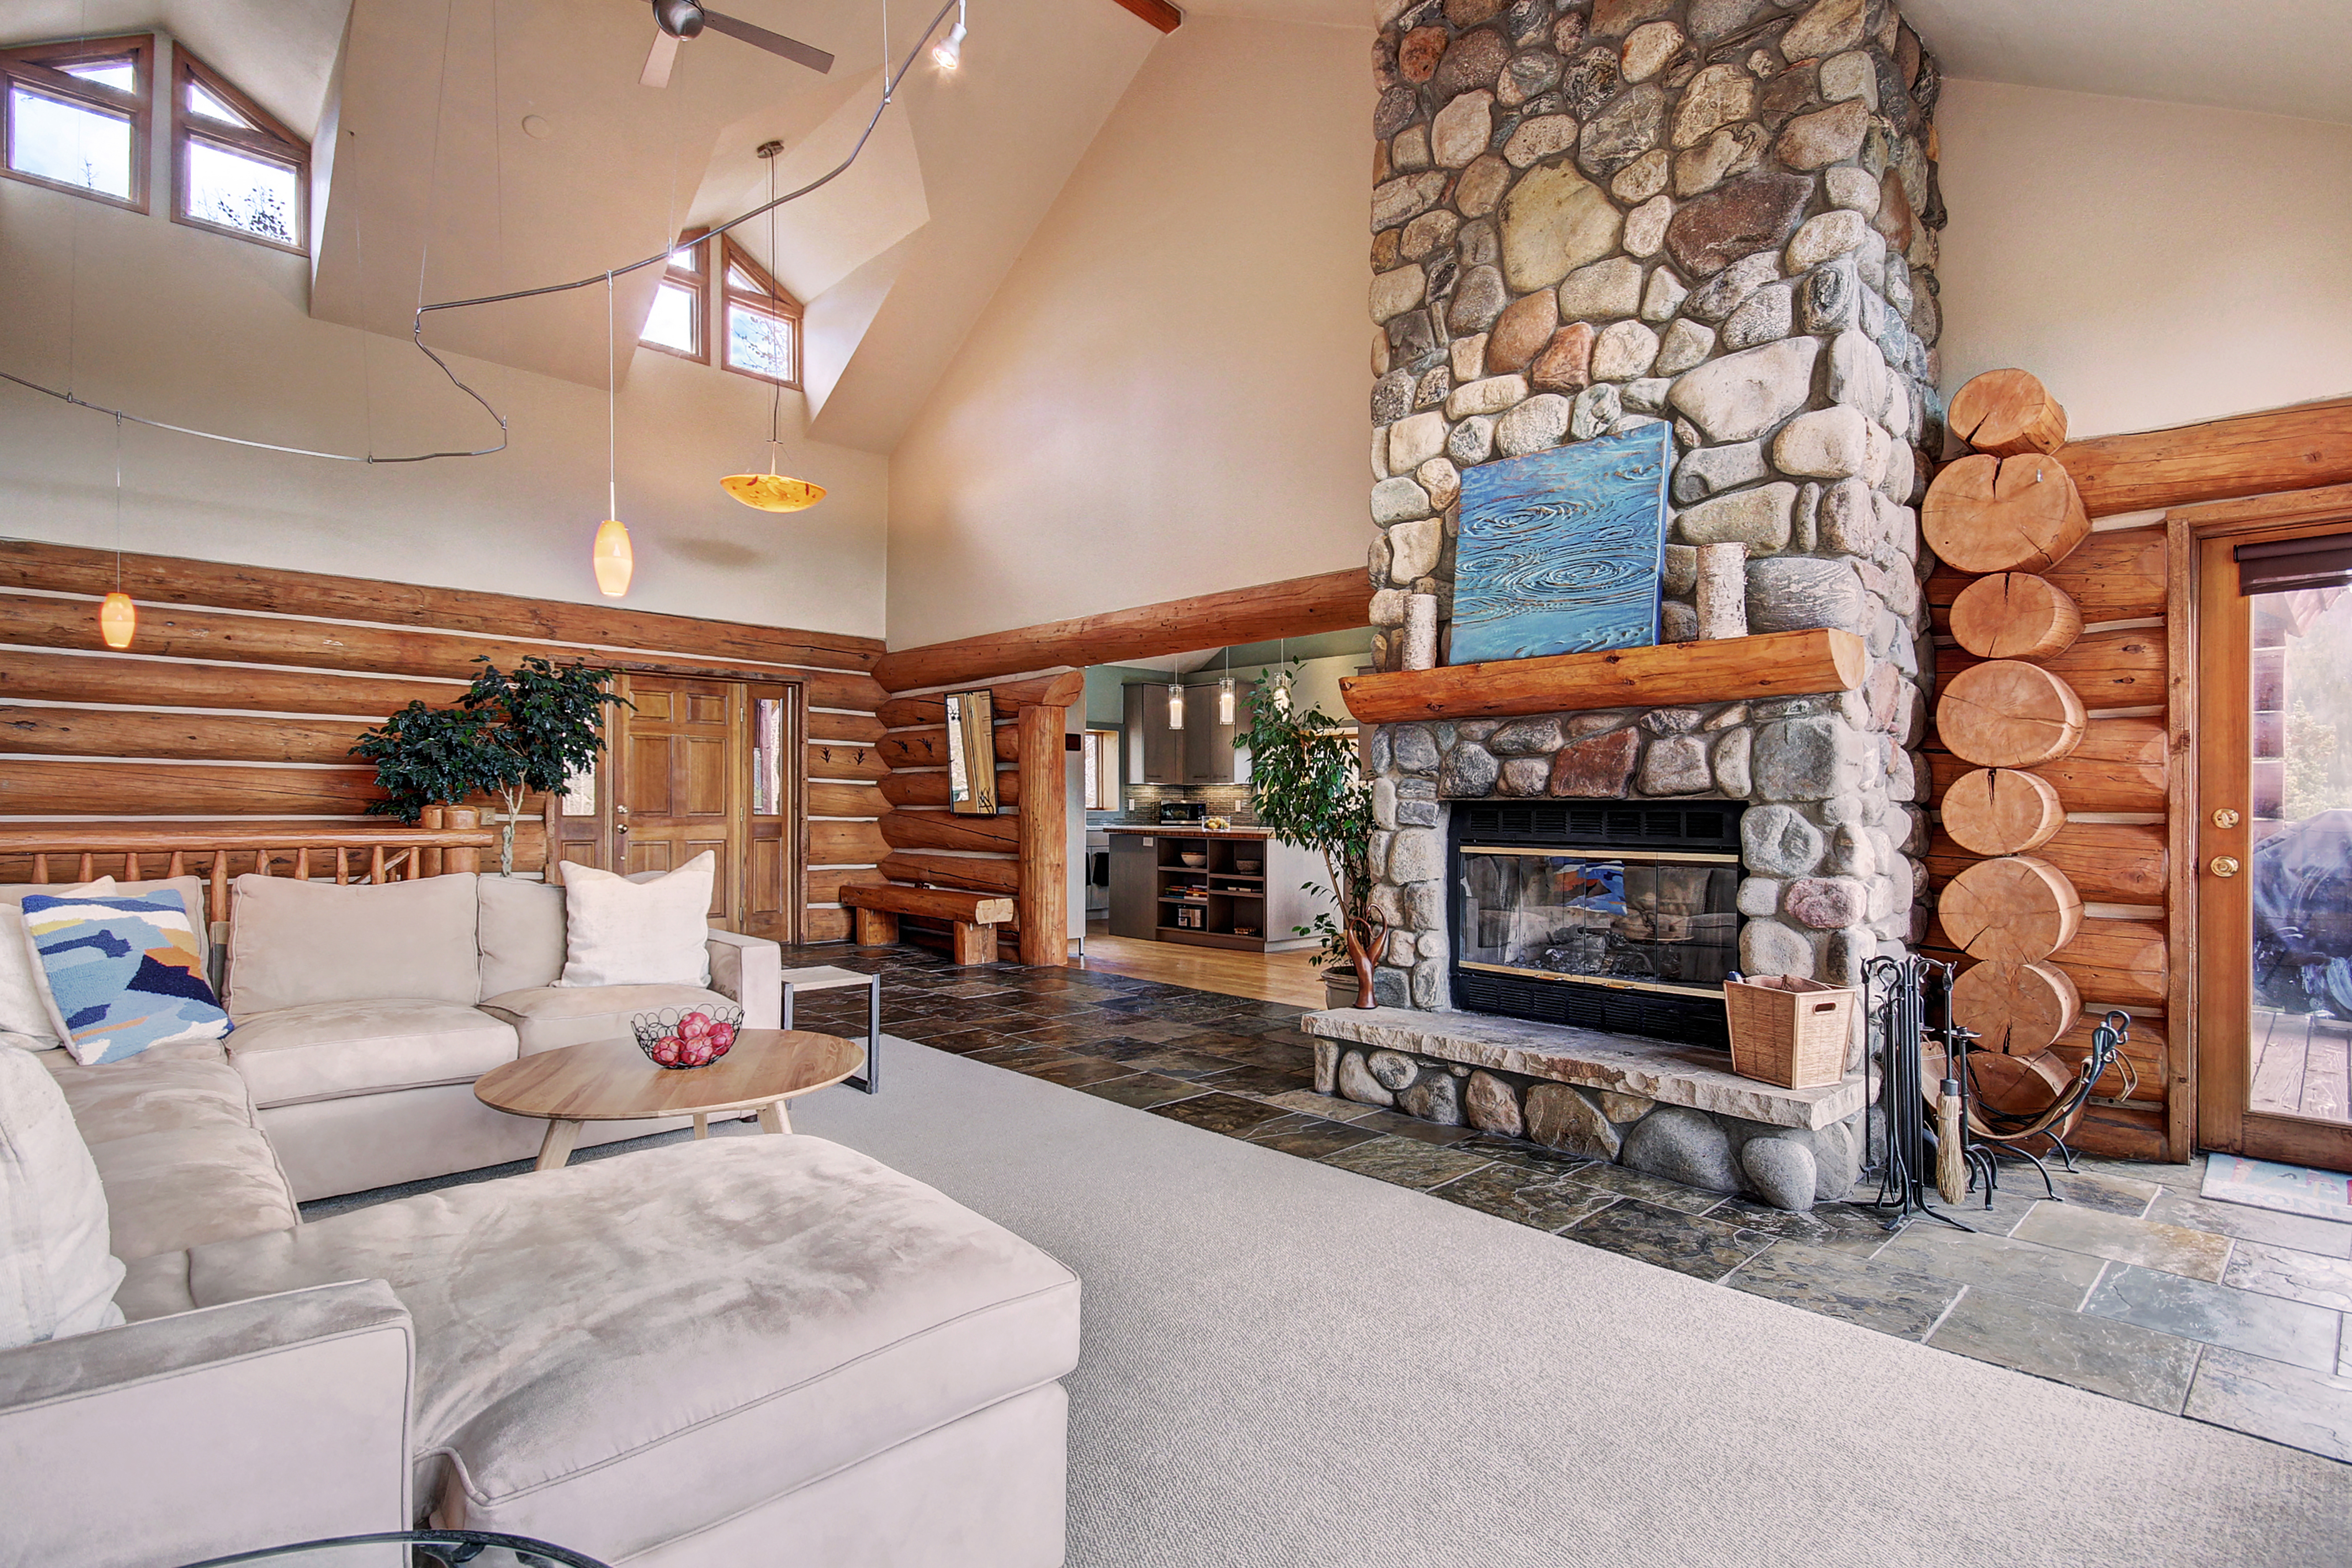 Revel in this updated log home and warm by the wood-burning fireplace - 10 Southface Breckenridge Vacation Rental